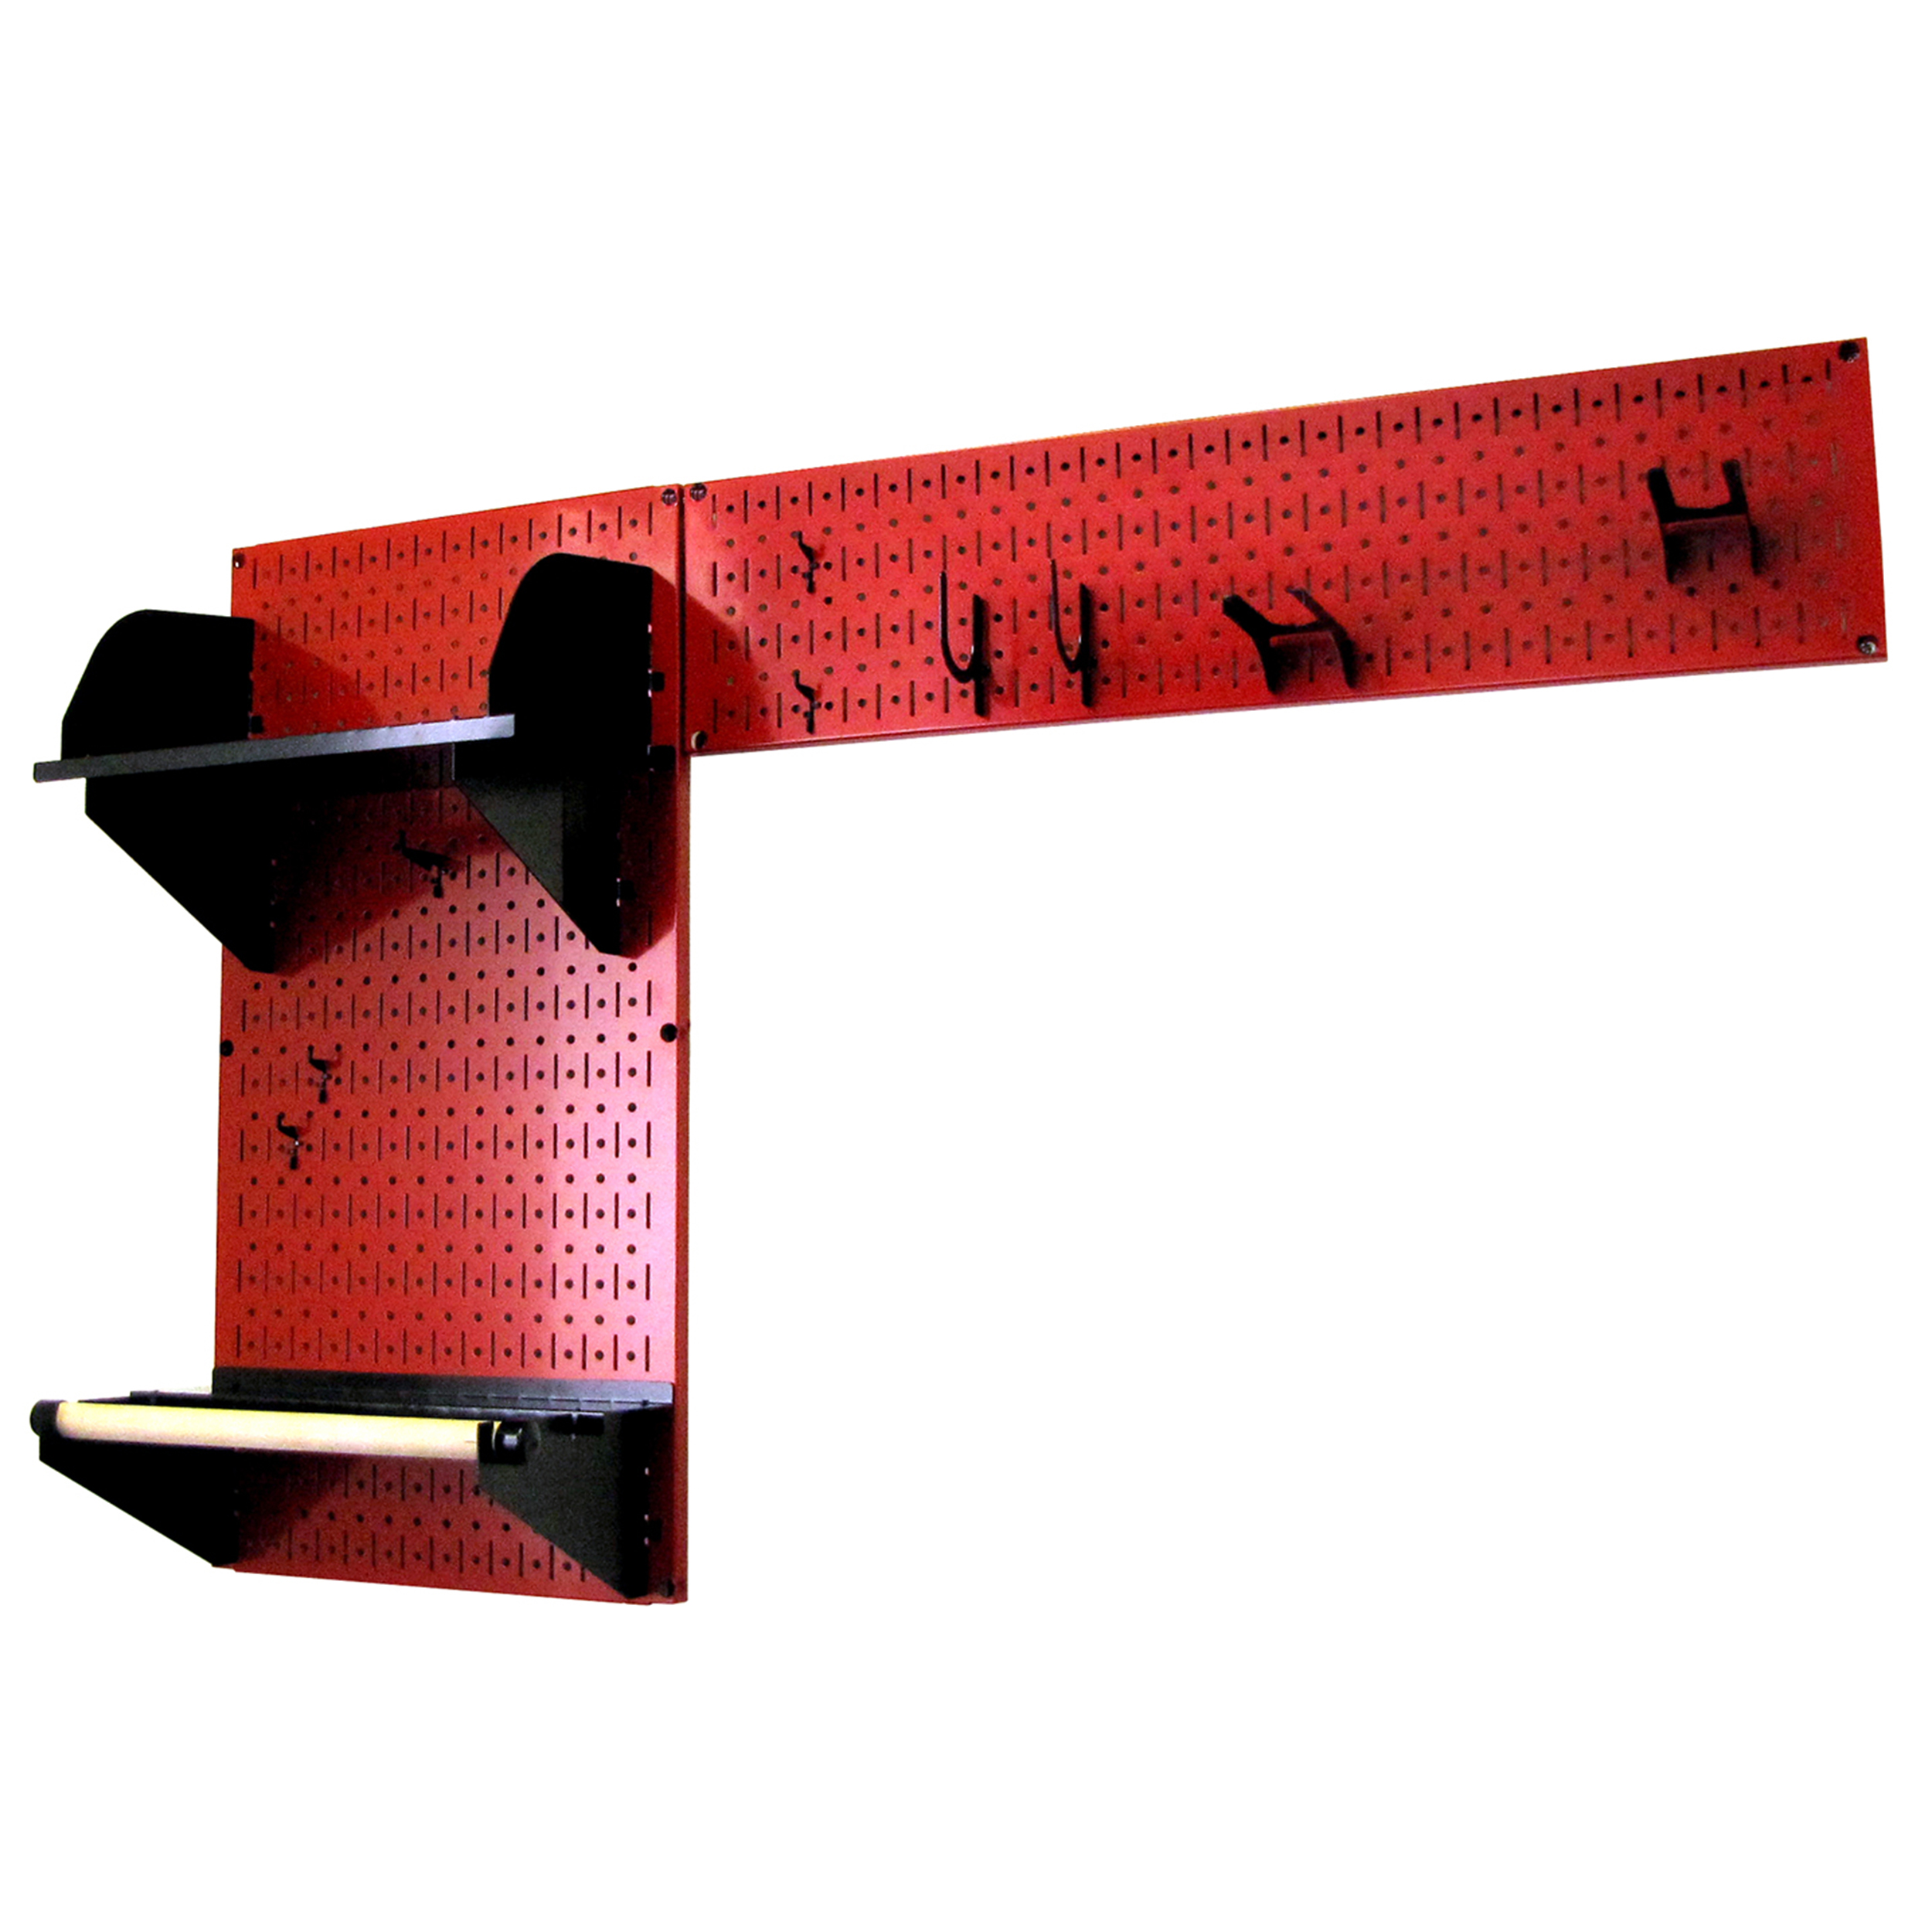 Pegboard Garden Tool Board Organizer With Red Pegboard And Black Accessories